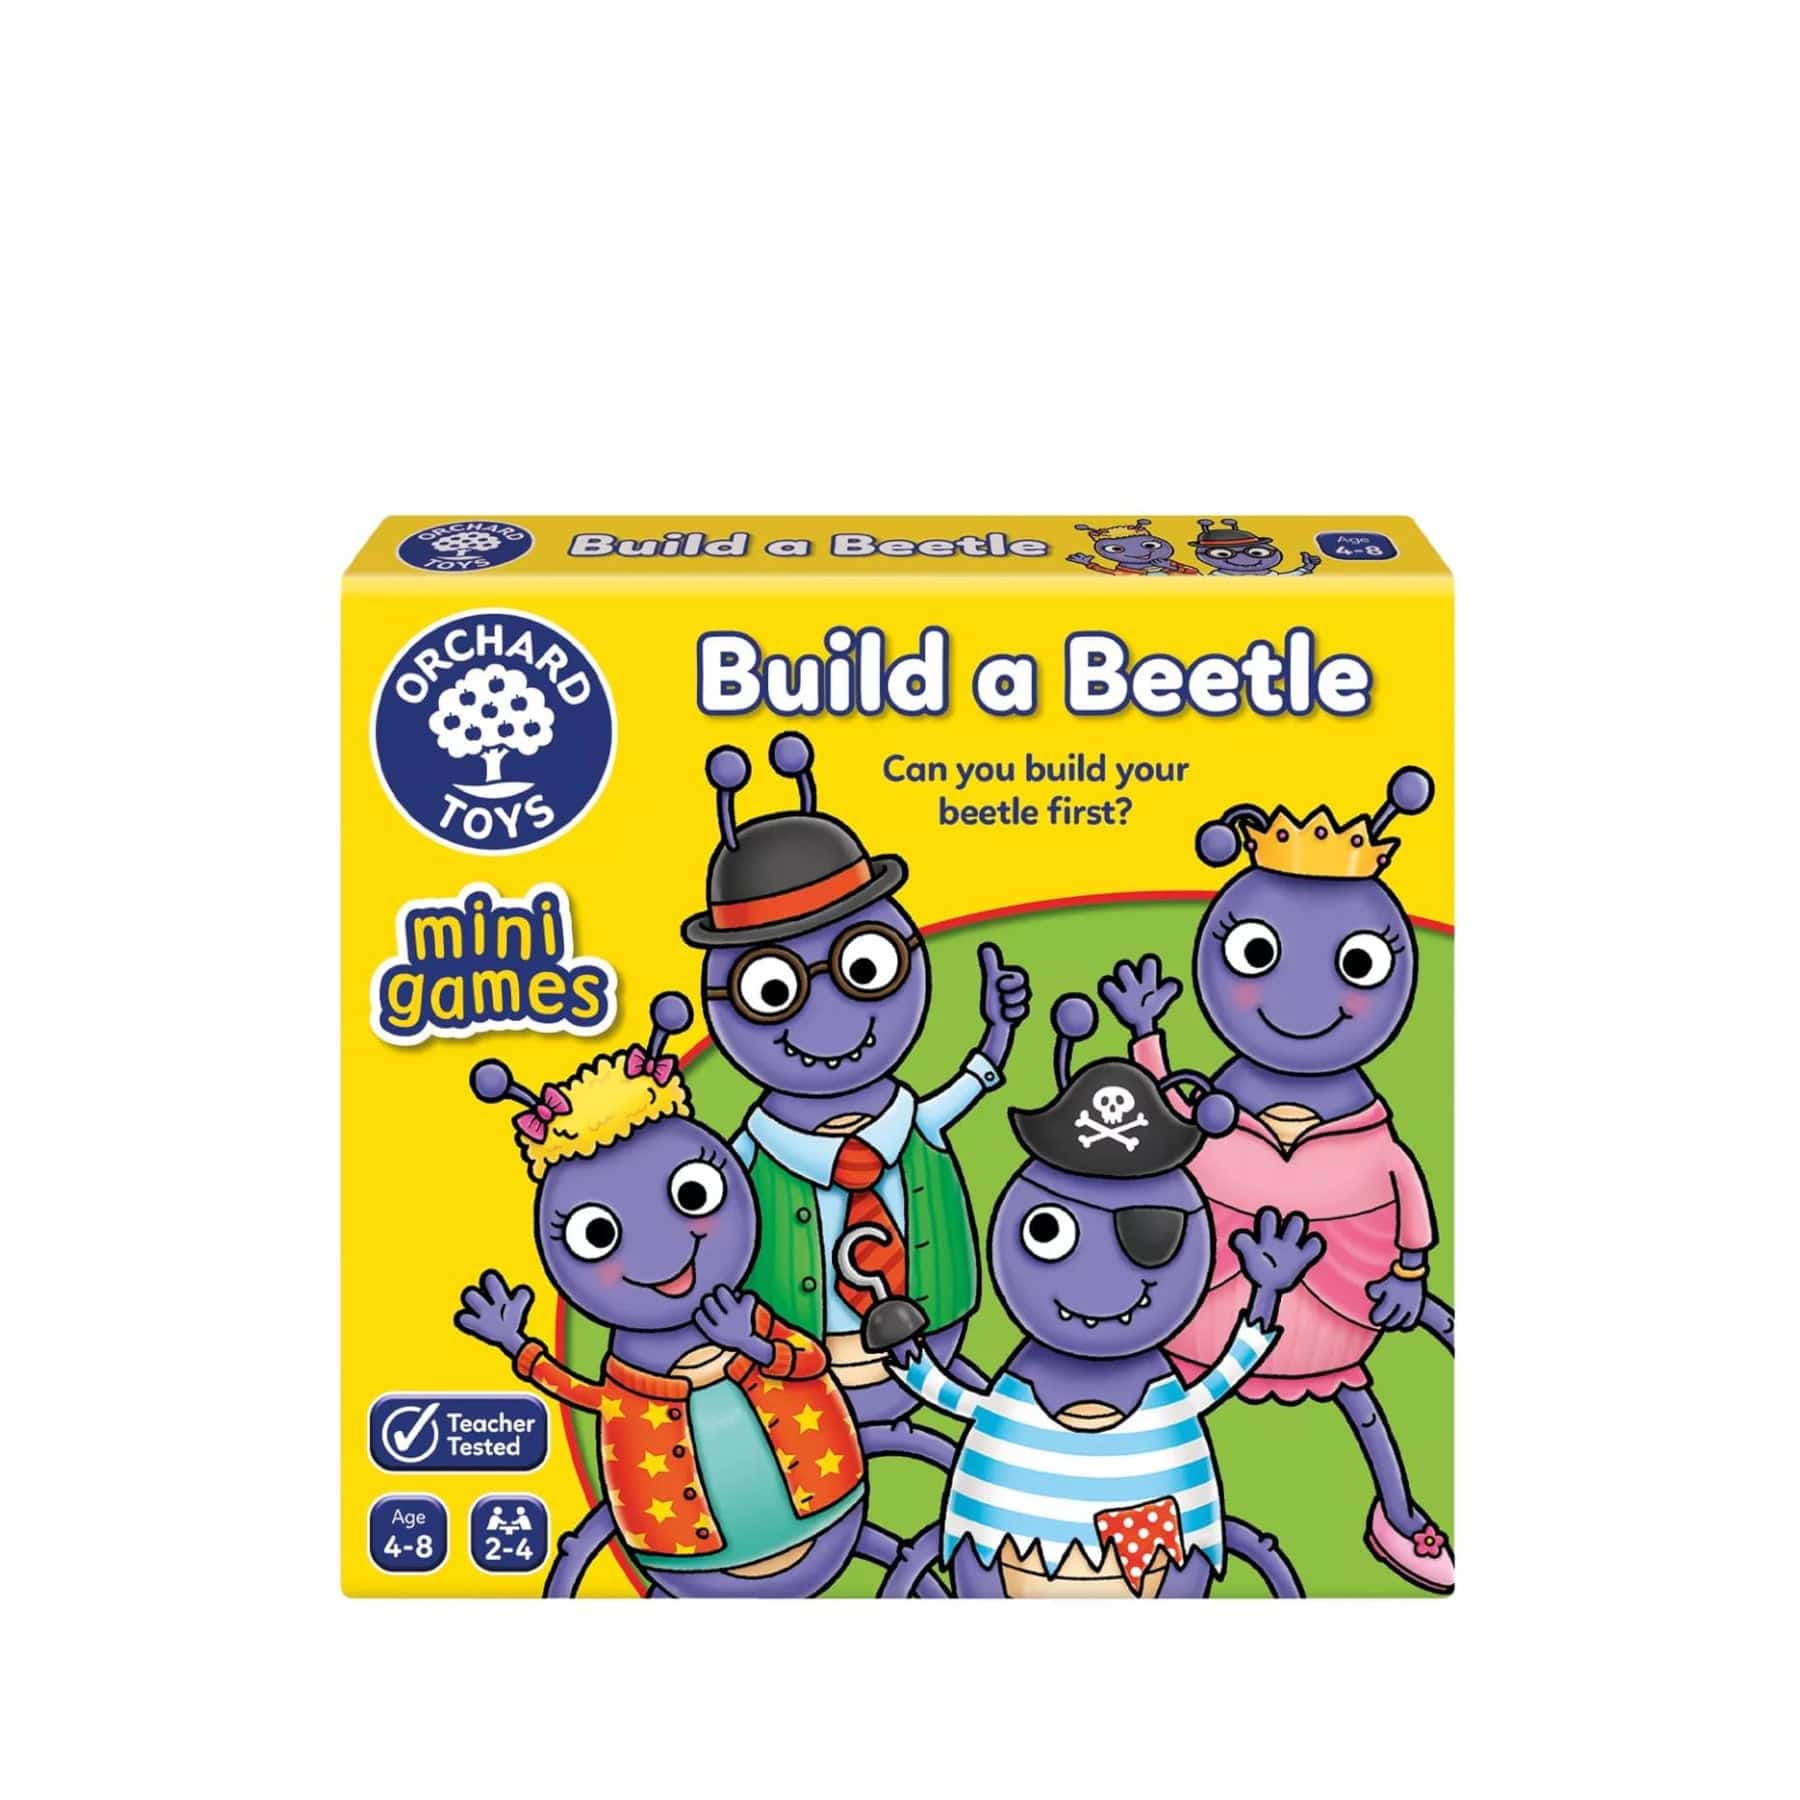 Orchard Toys Build a Beetle board game box with cartoon beetles, educational kids game for ages 4-8.